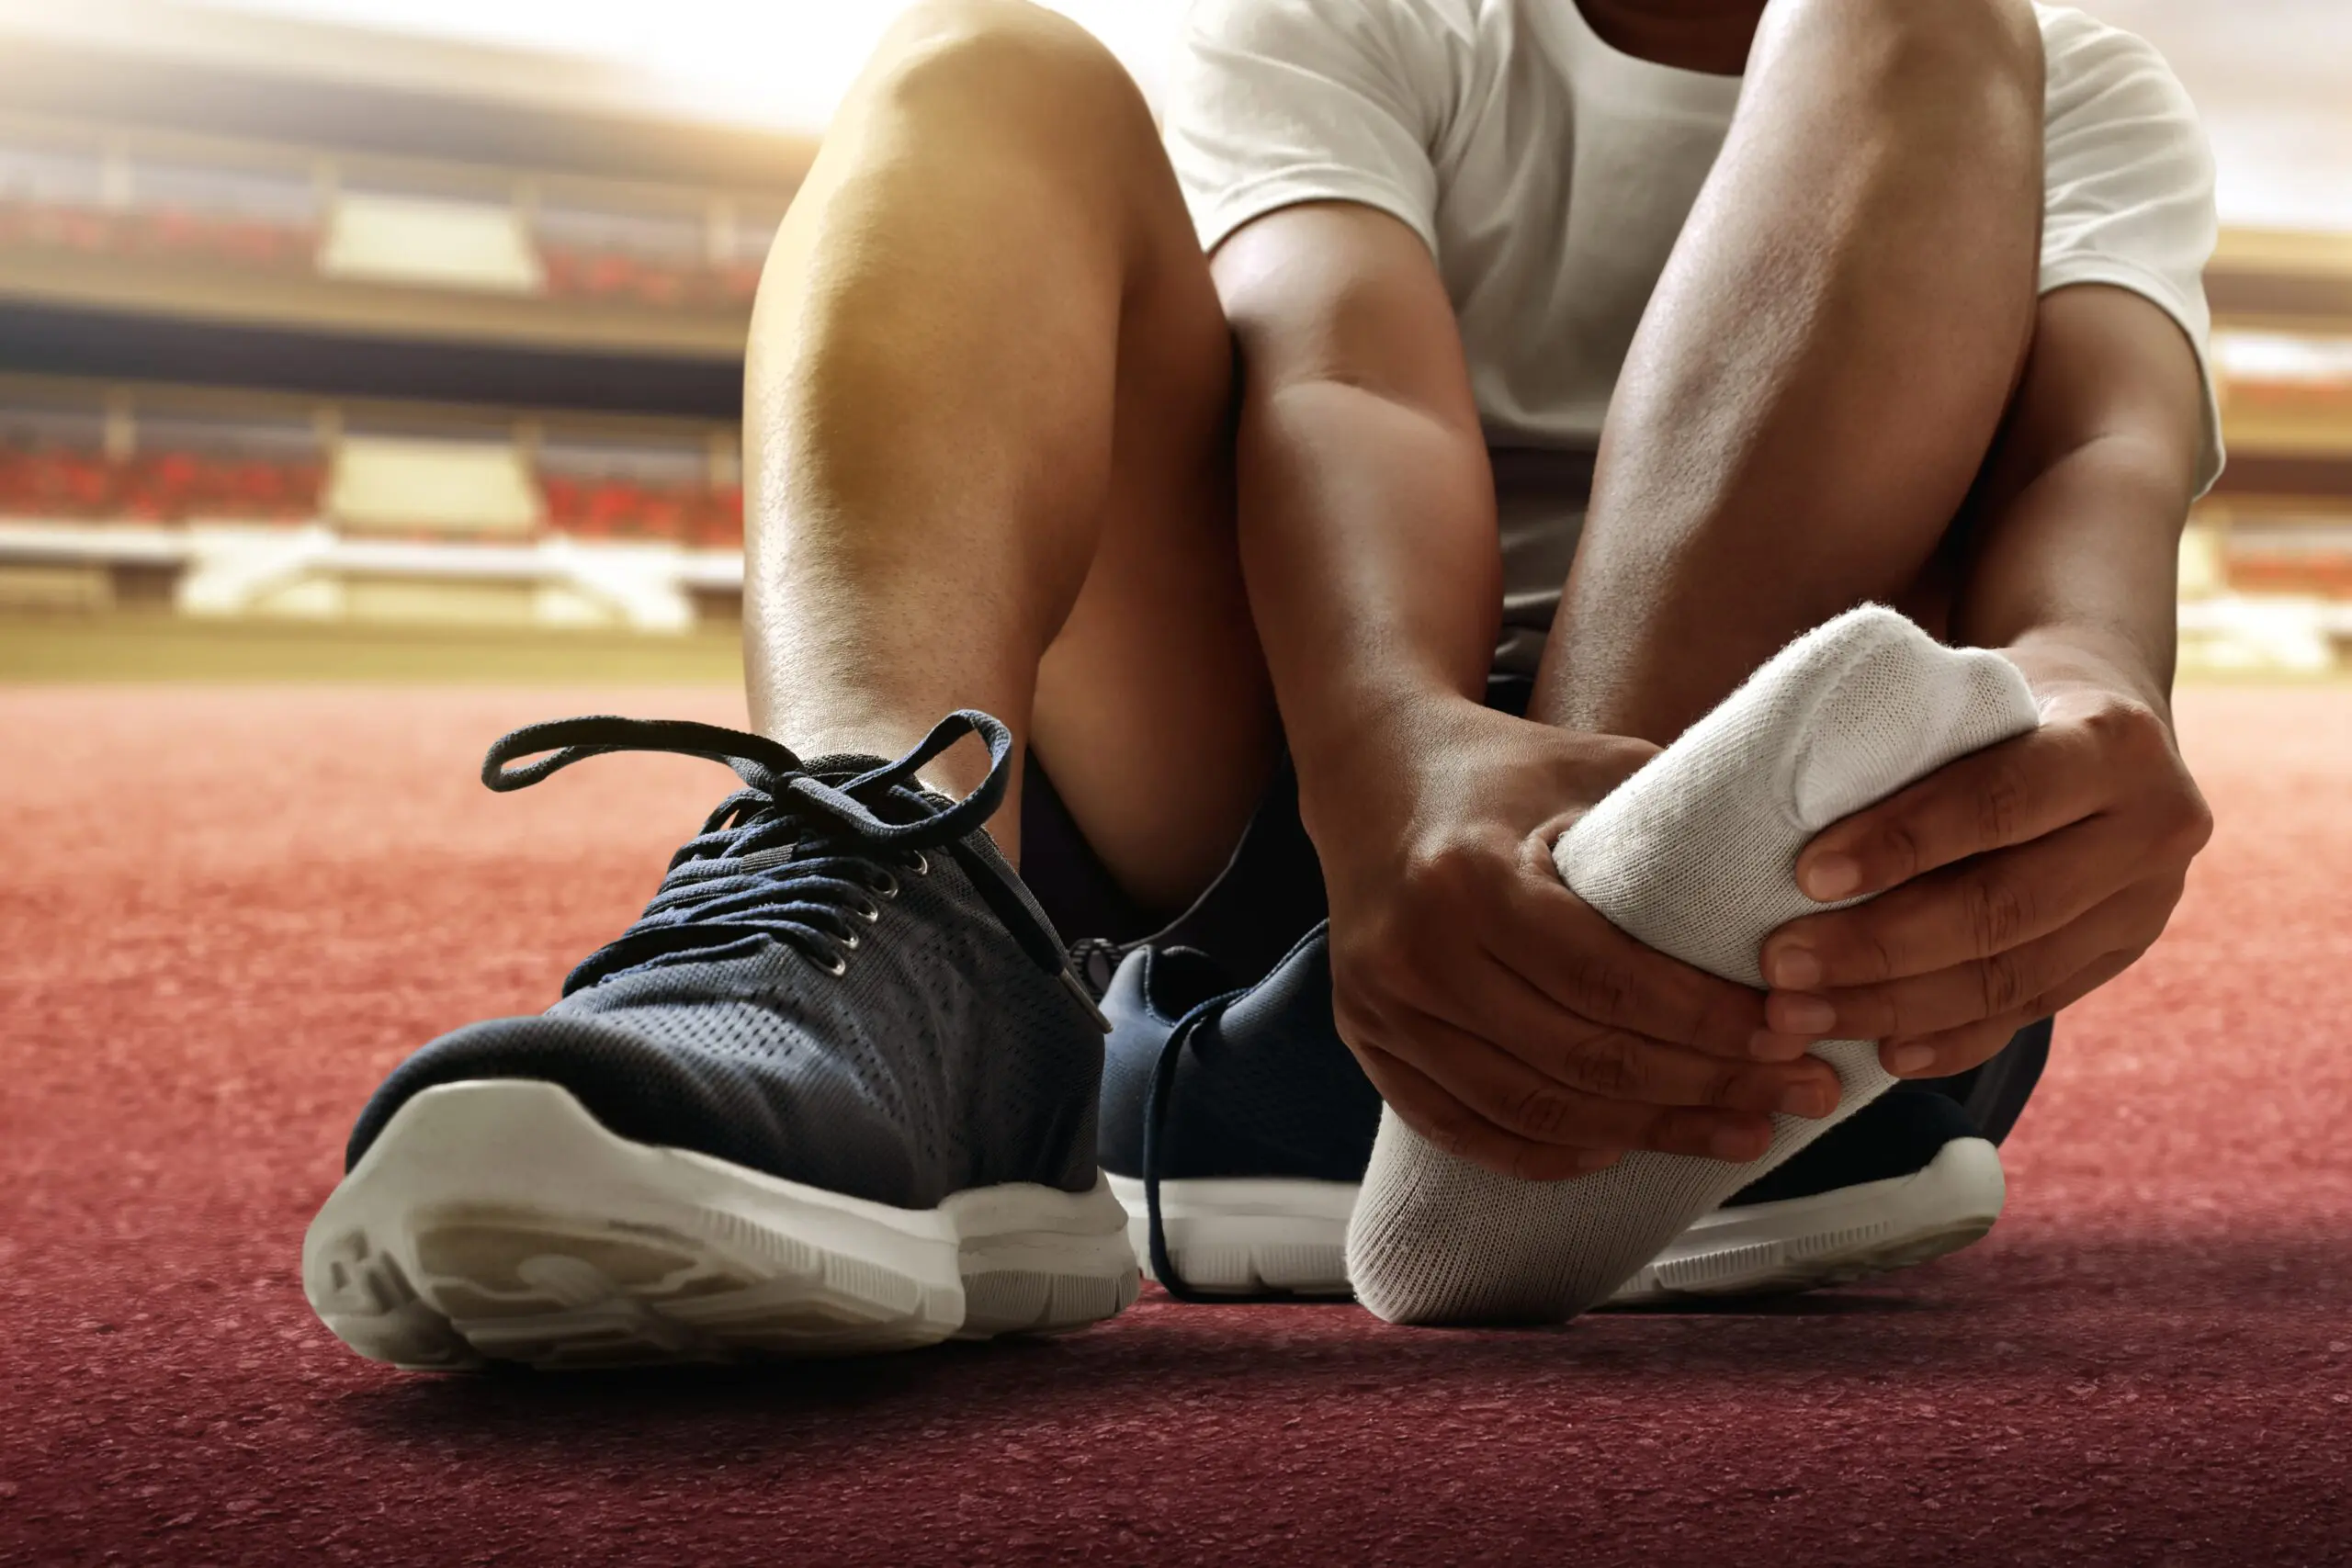 How To Avoid Exercise-Related Foot Injuries